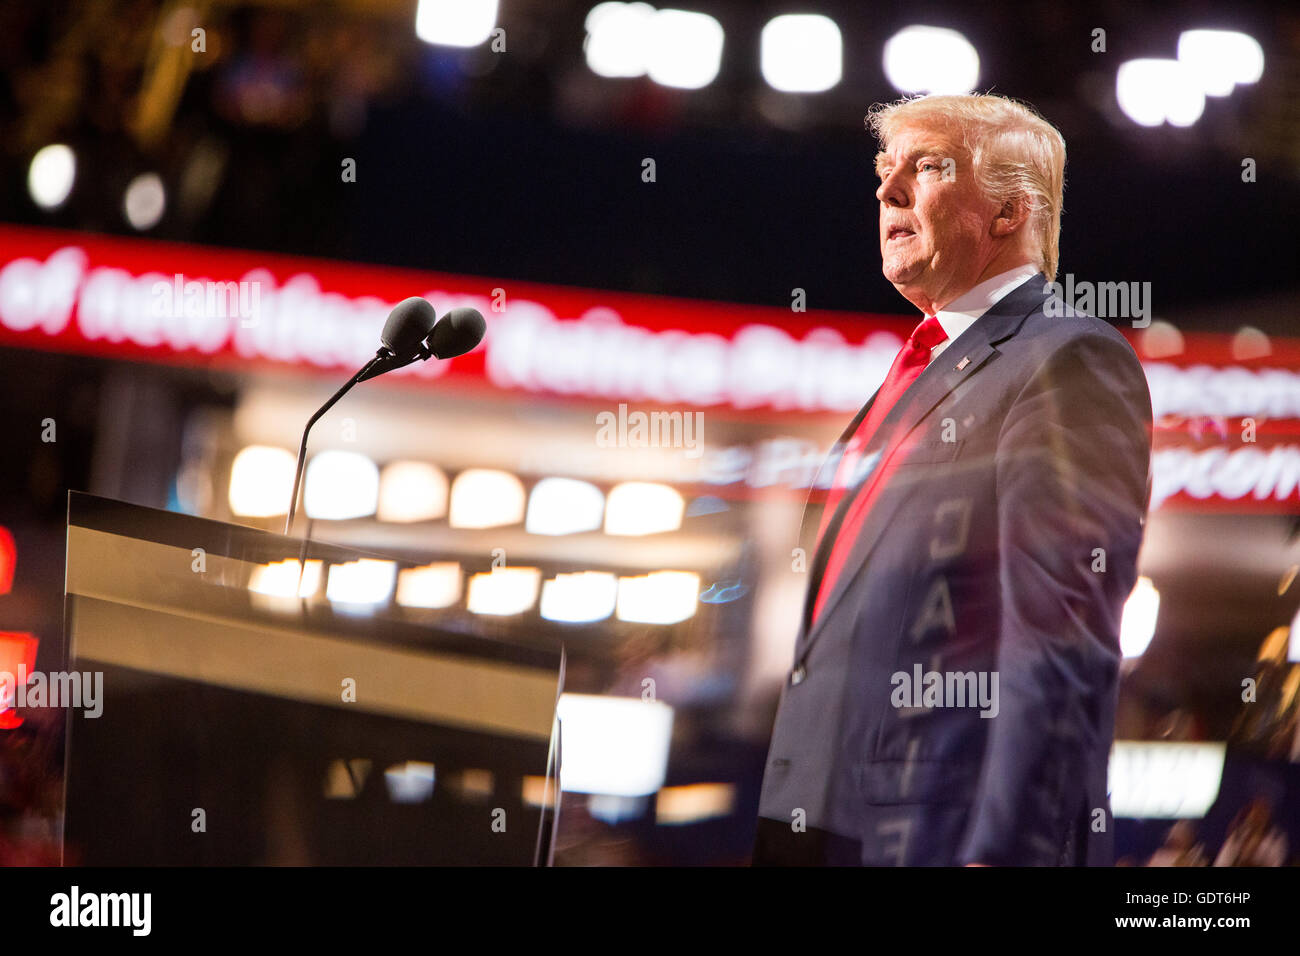 Cleveland, Ohio, USA; July 21, 2016: Donald J. Trump accepts his nomination to run for president at the Republican National Convention. (Philip Scalia/Alamy Live News) Stock Photo